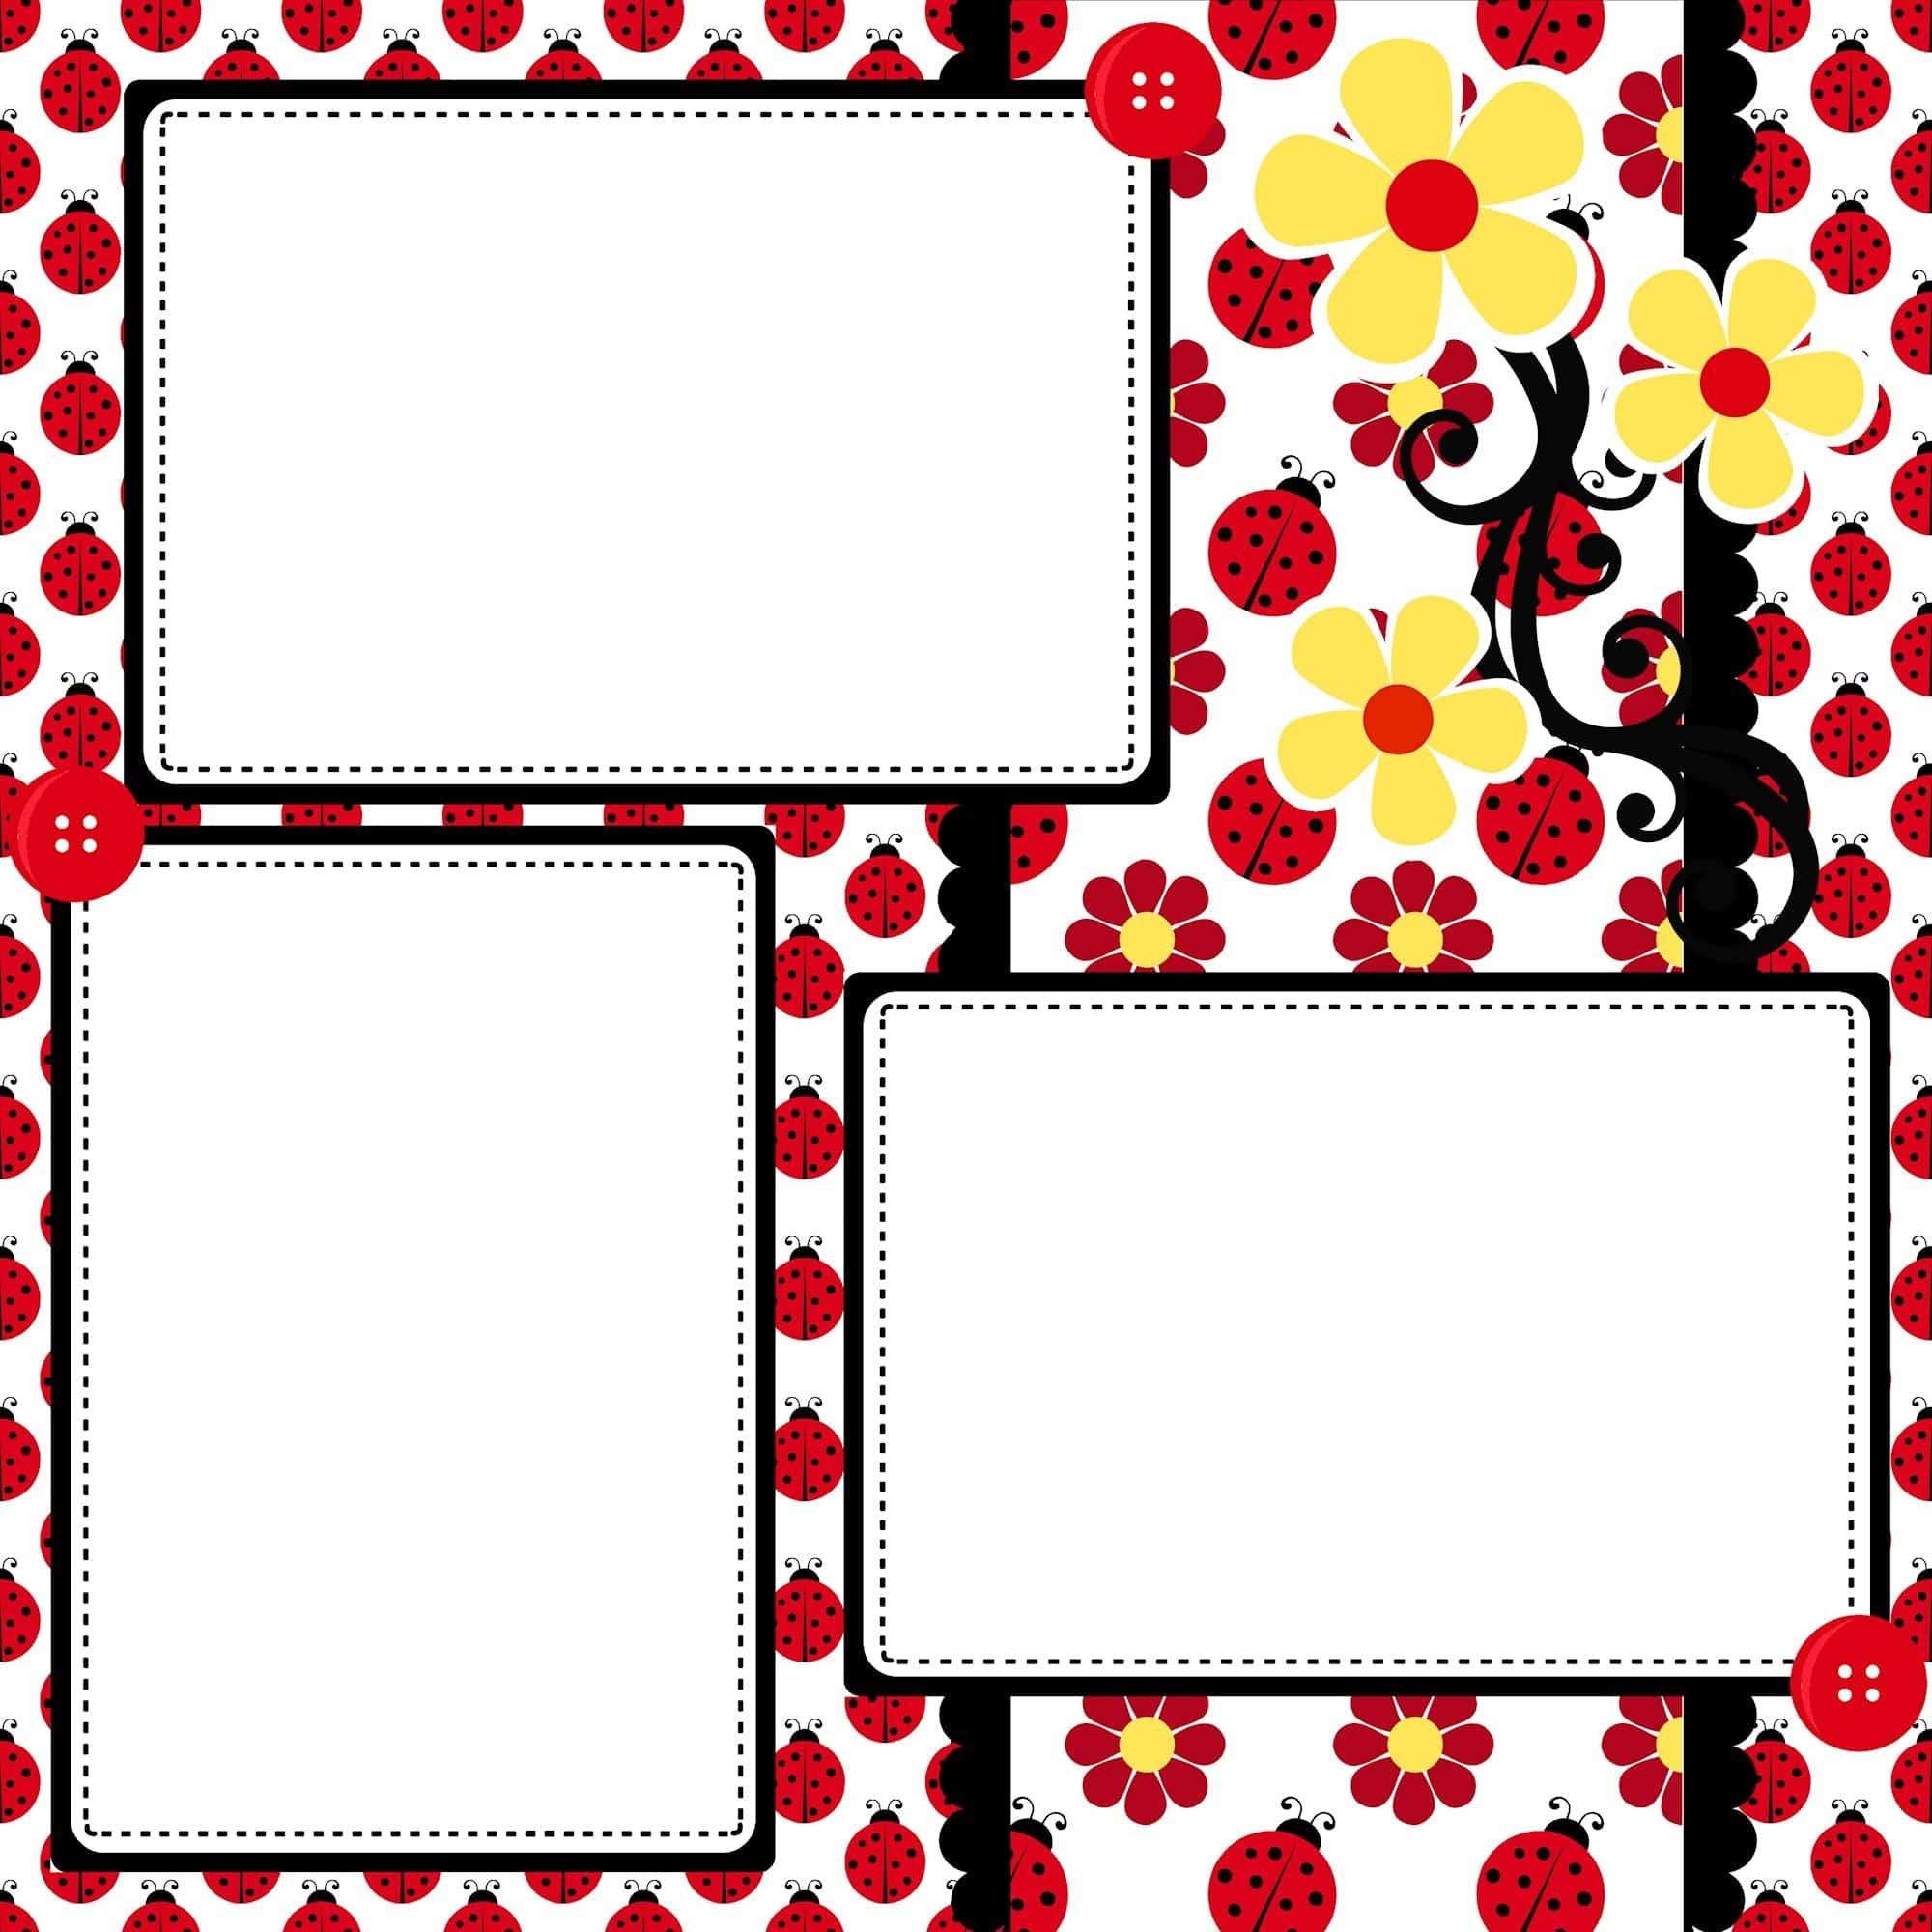 Little Lady Ladybug (2) - 12 x 12 Premade, Printed Scrapbook Pages by SSC Designs - Scrapbook Supply Companies